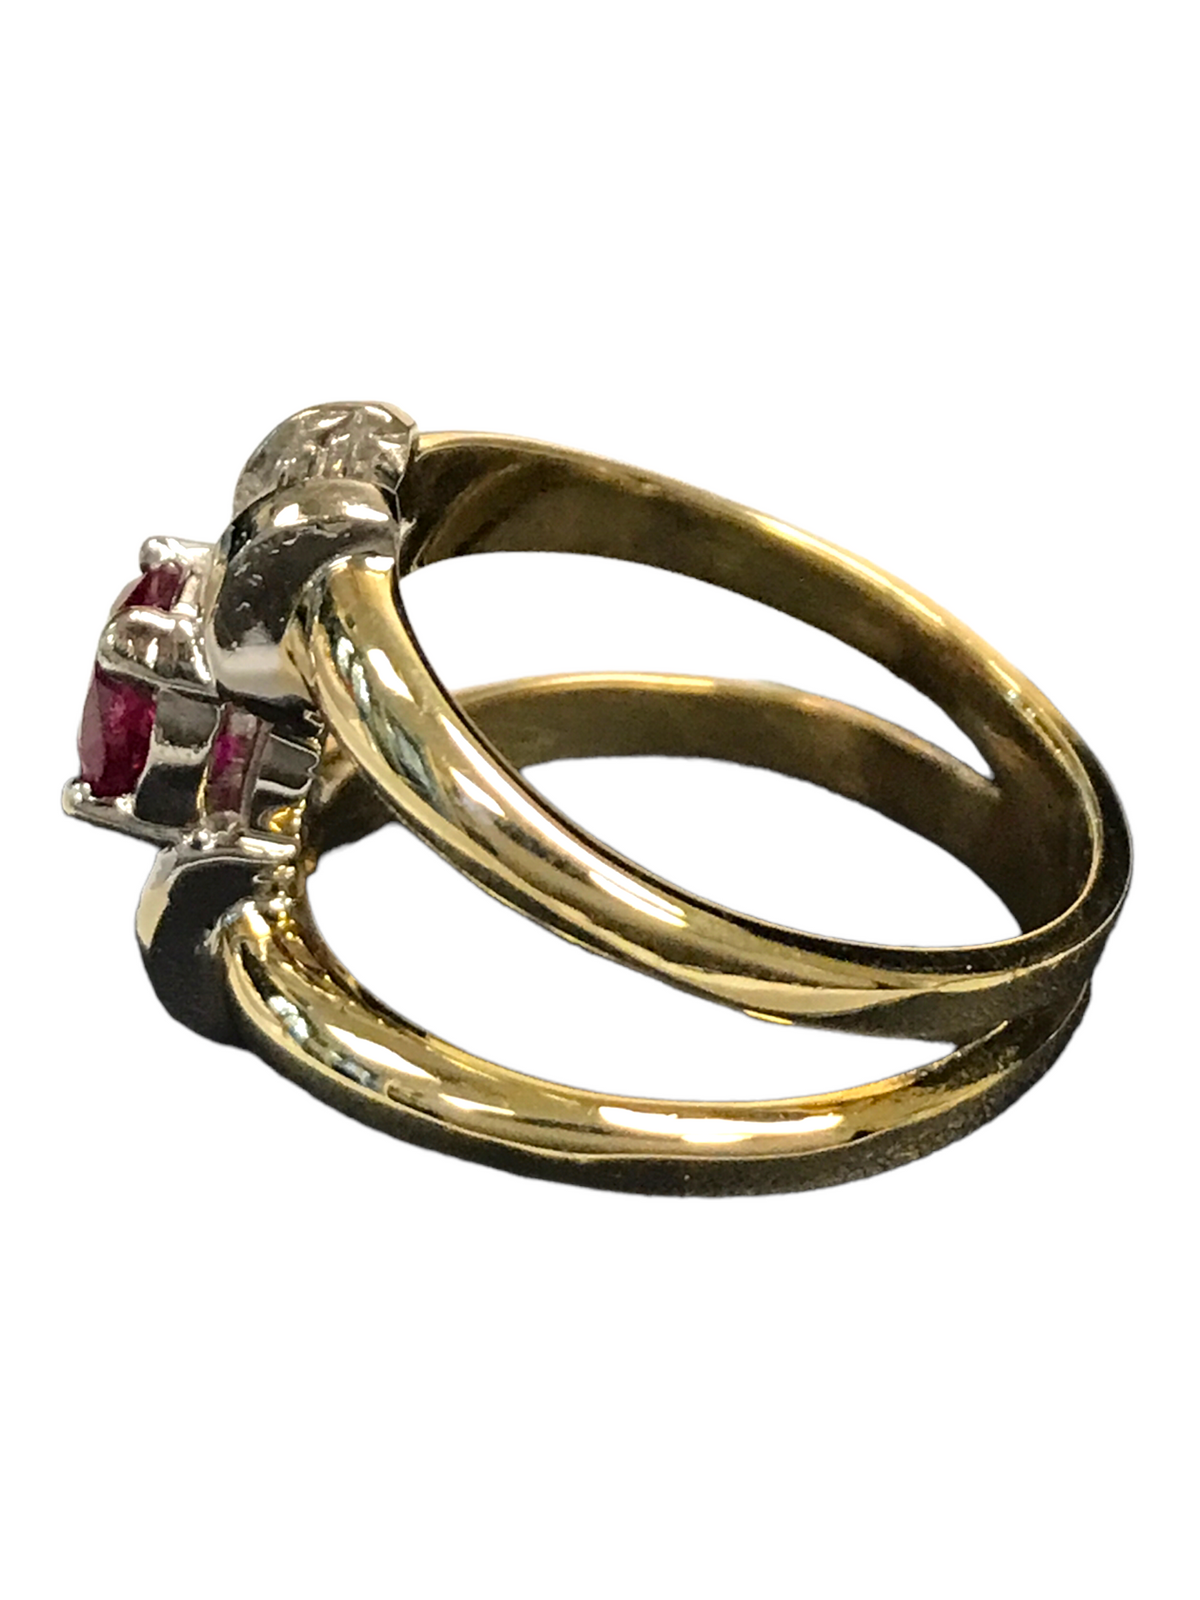 14K Yellow Gold Ruby and Diamond Ladies Ring Size 7